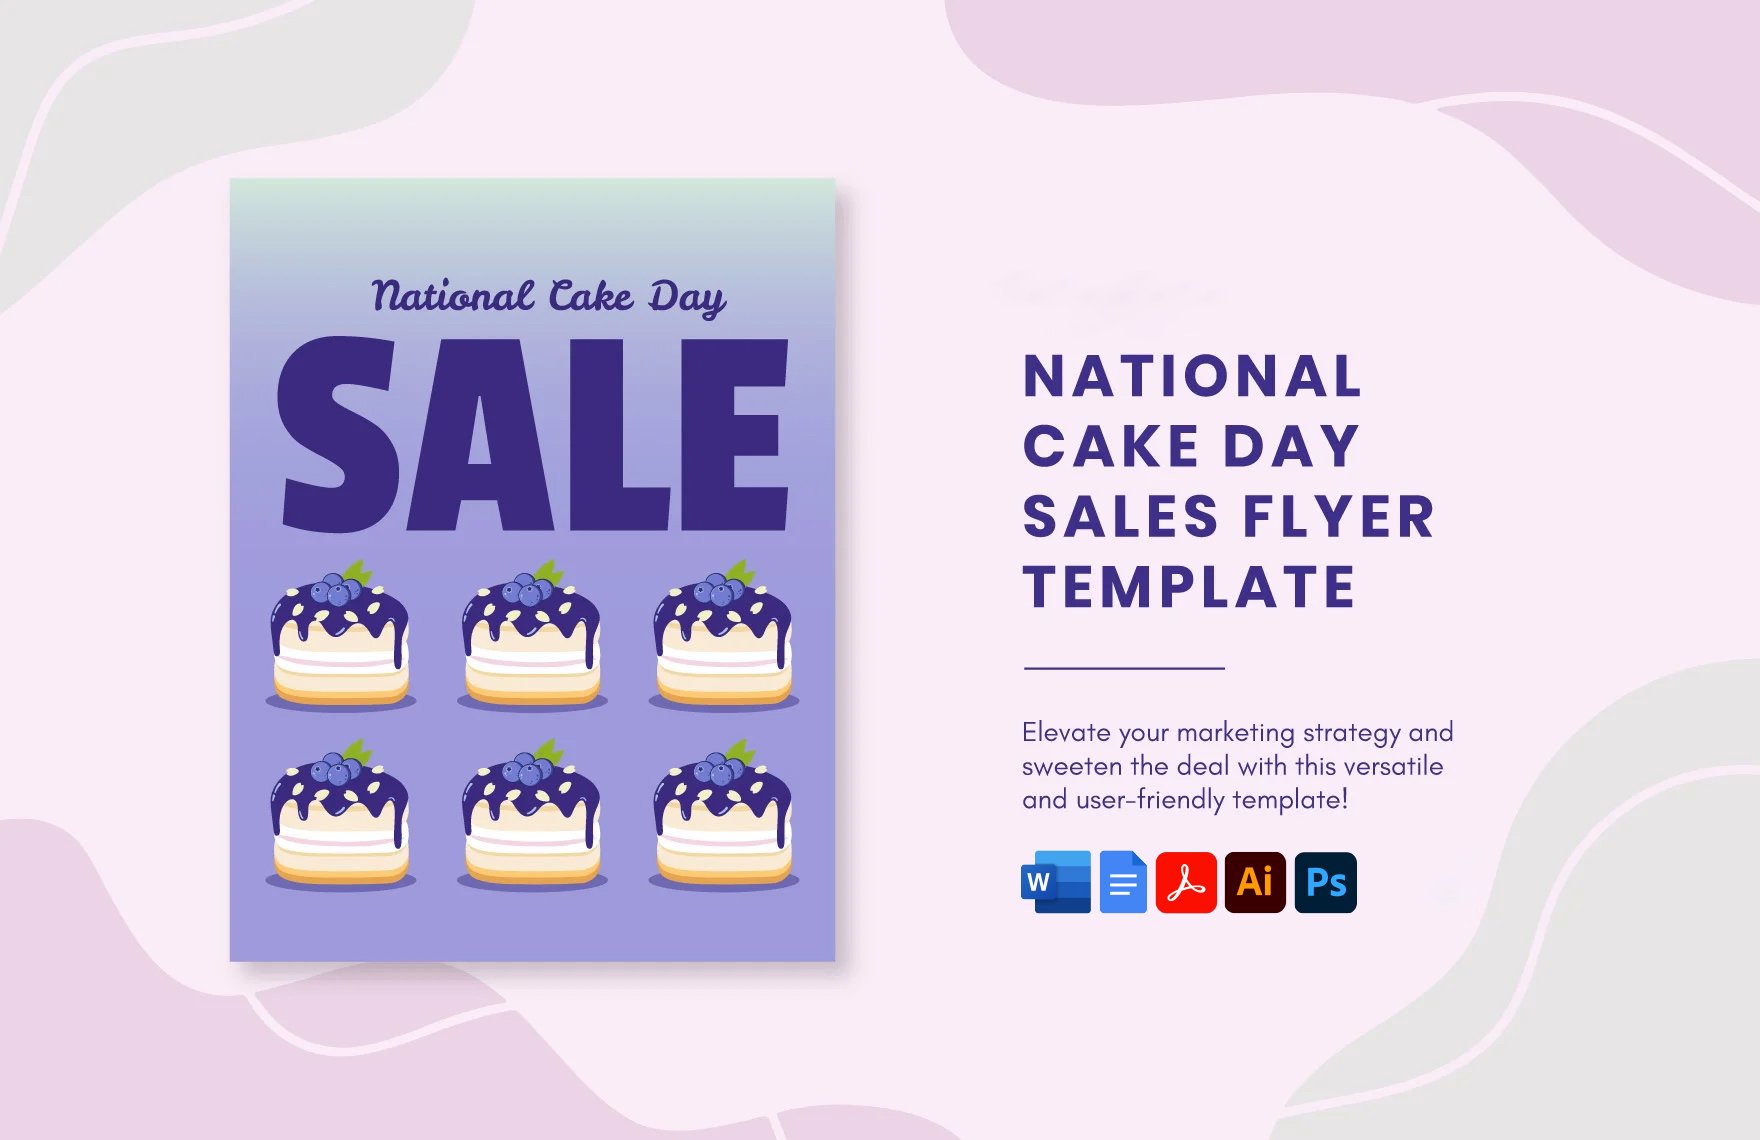 Free National Cake Day Sales Flyer Template in Word, Google Docs, PDF, Illustrator, PSD